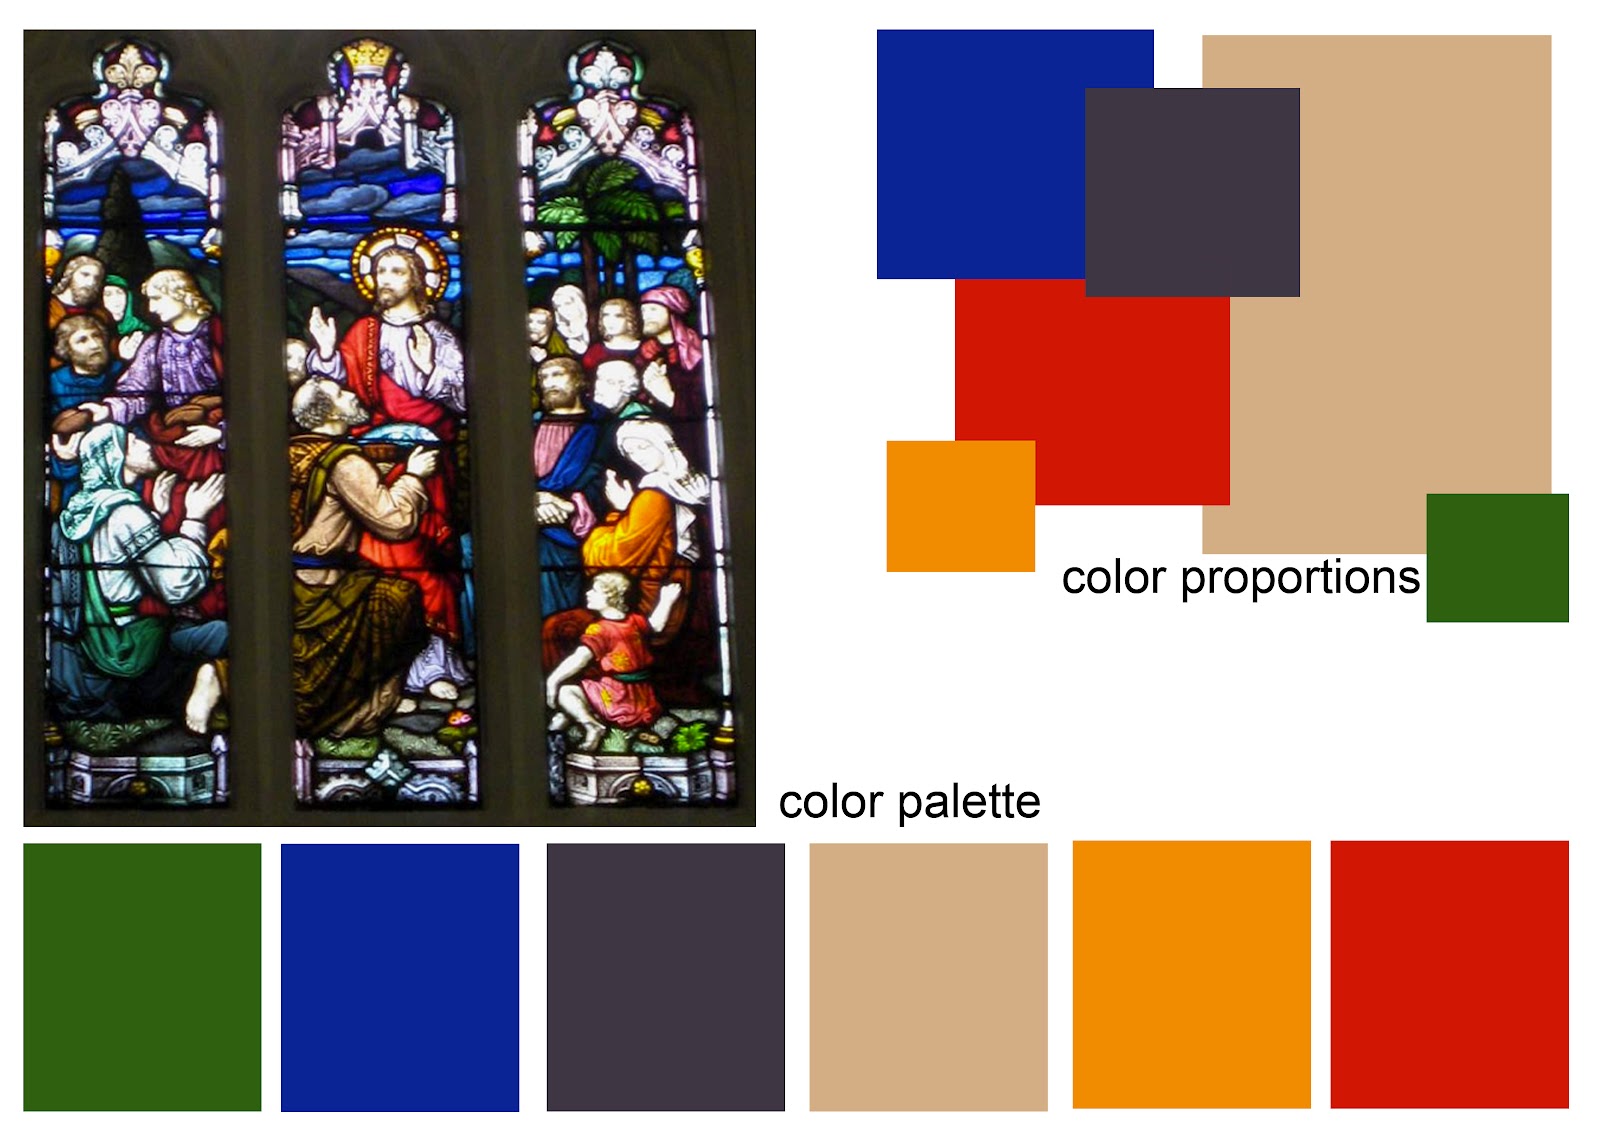 color palette from image